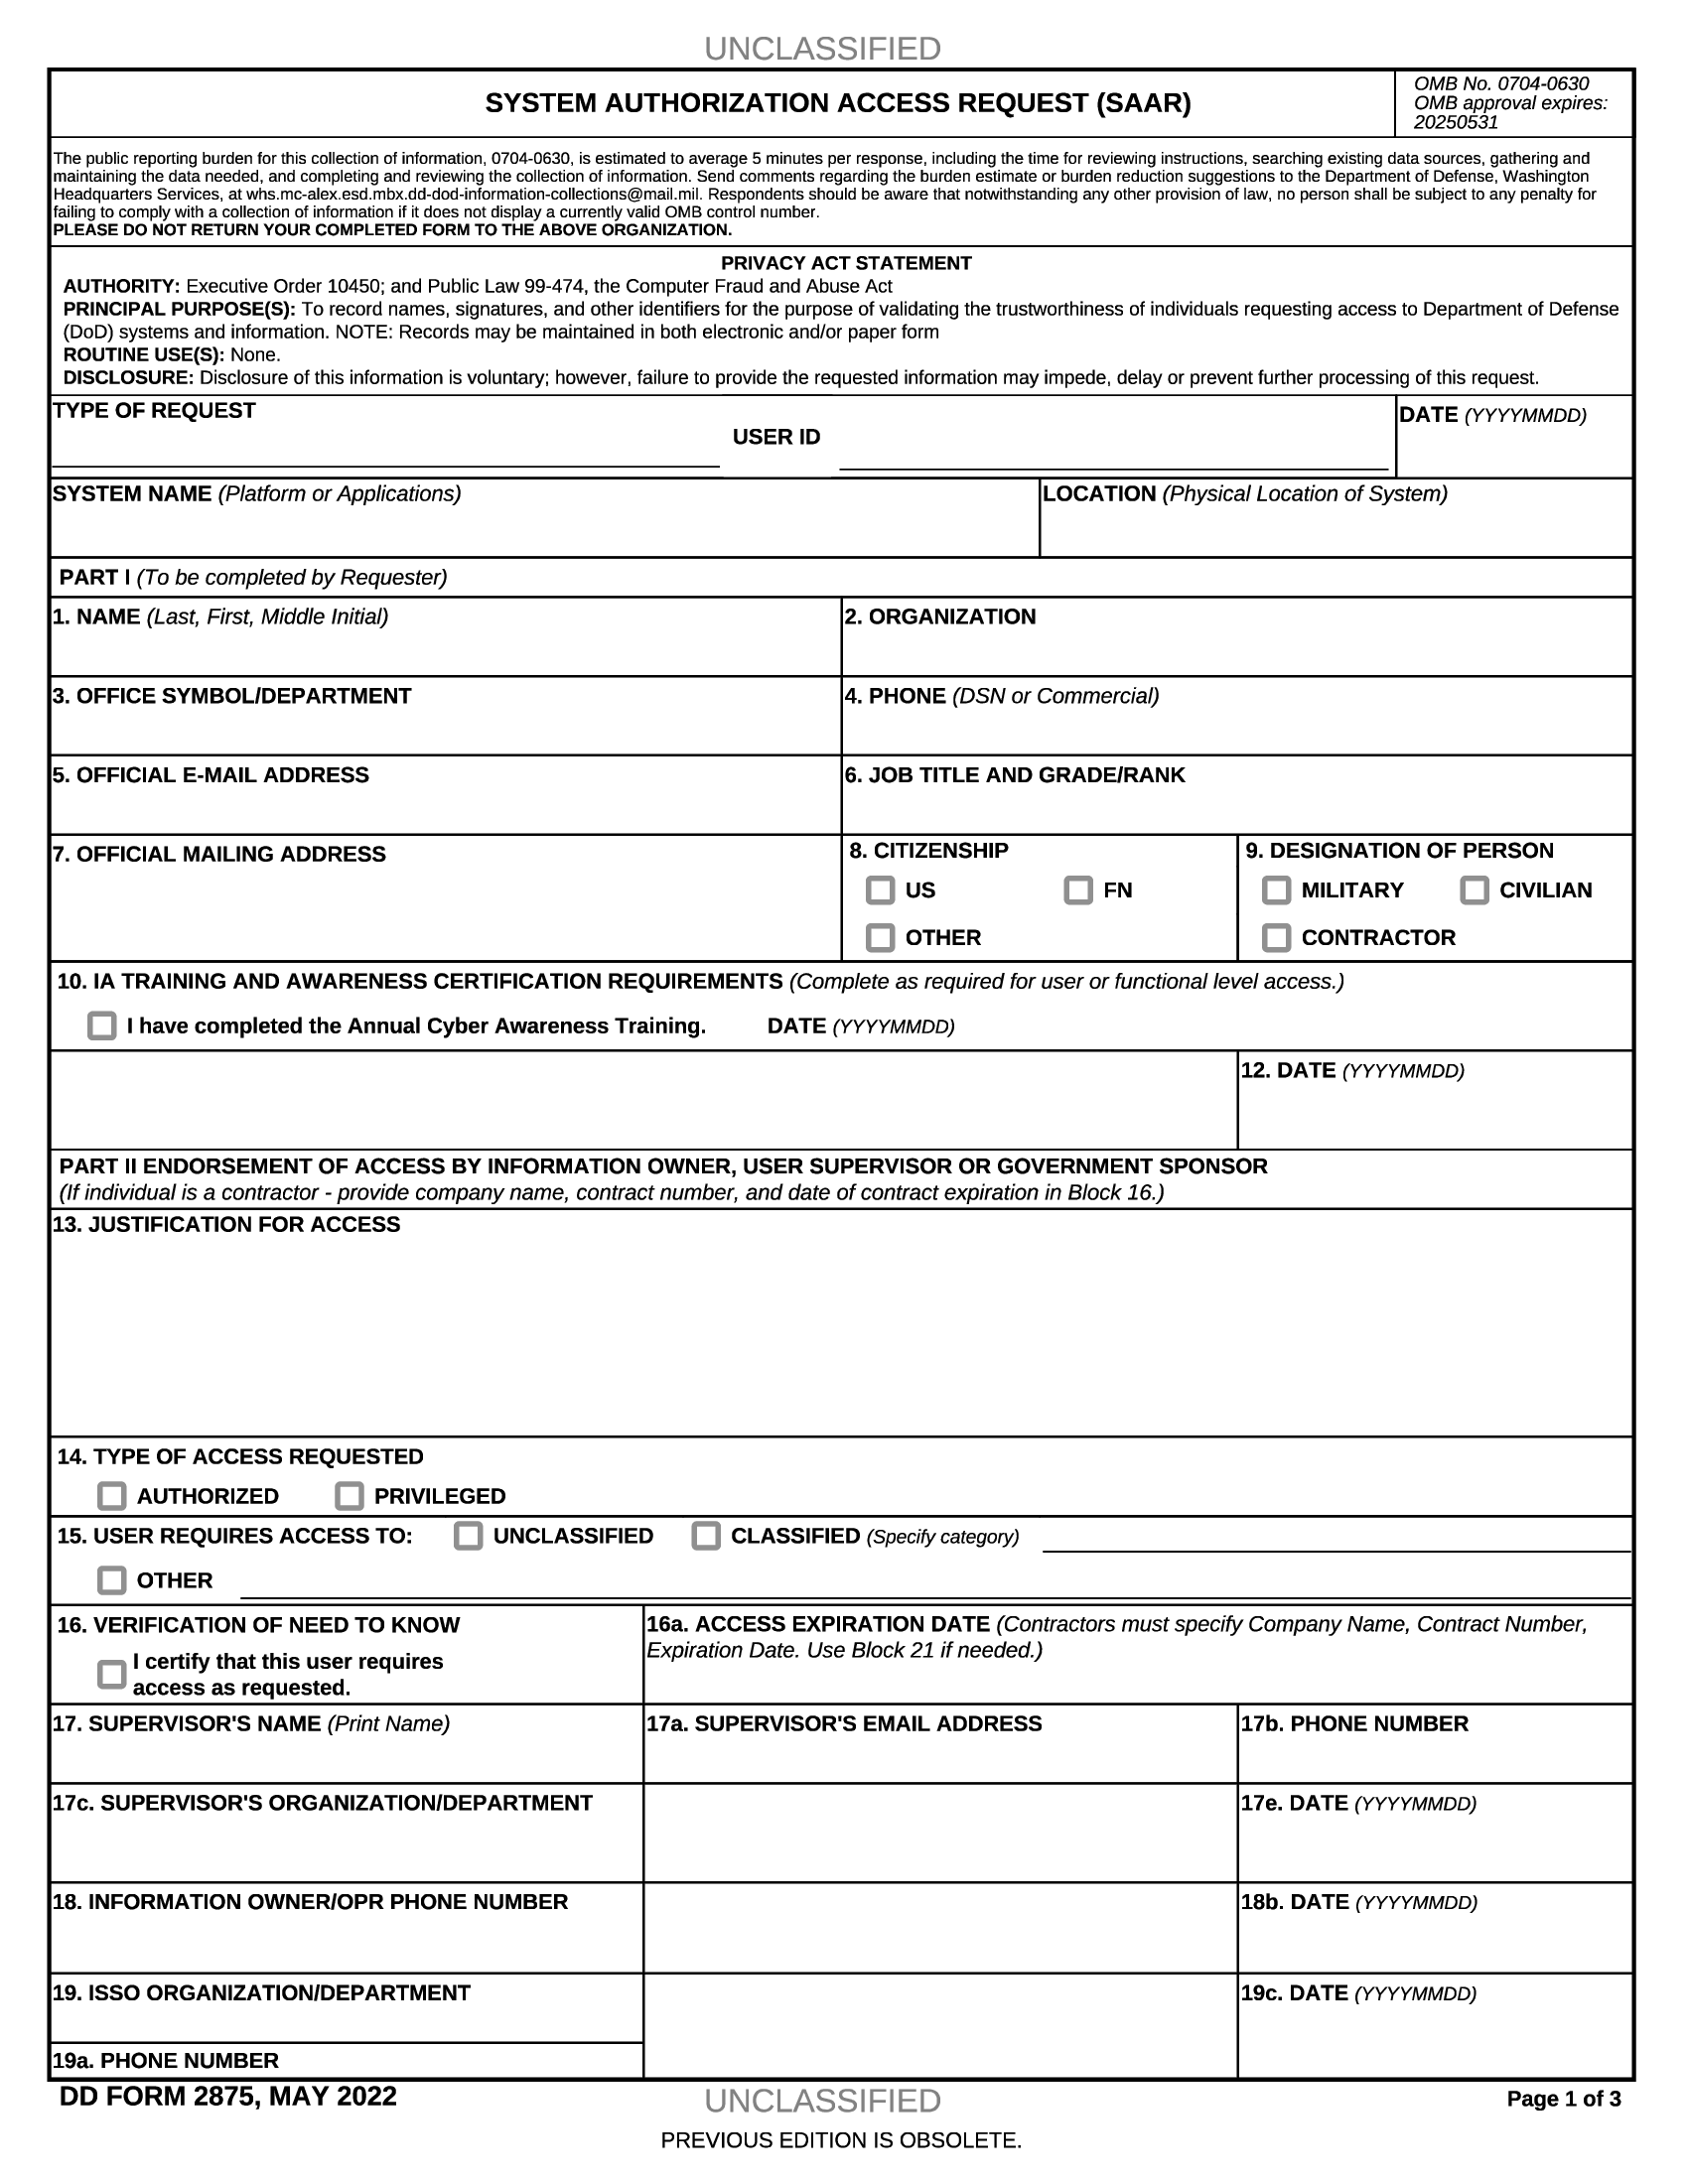 DD Form 2875. System Authorization Access Request (SAAR) | Forms - Docs ...